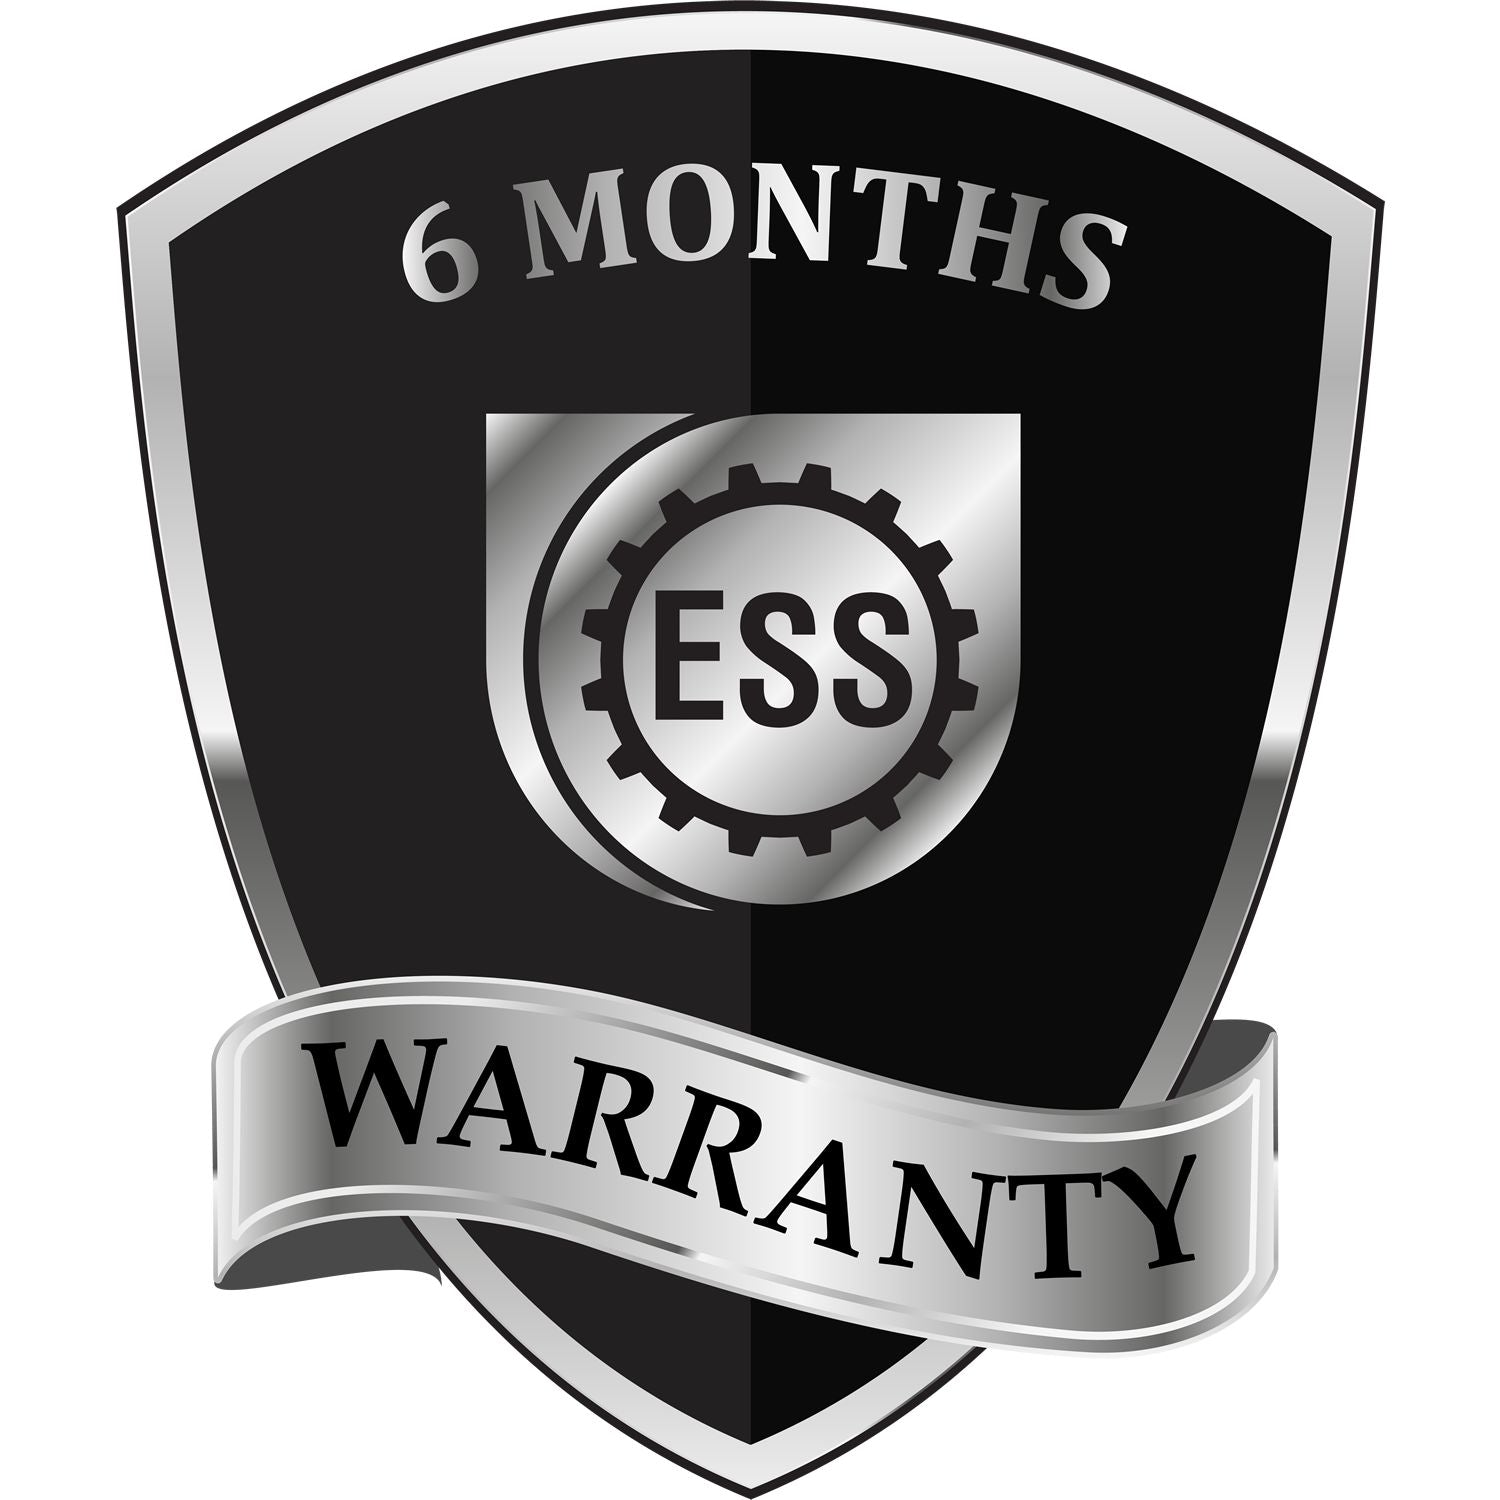 A badge or emblem showing a warranty icon for the Wisconsin Professional Engineer Seal Stamp